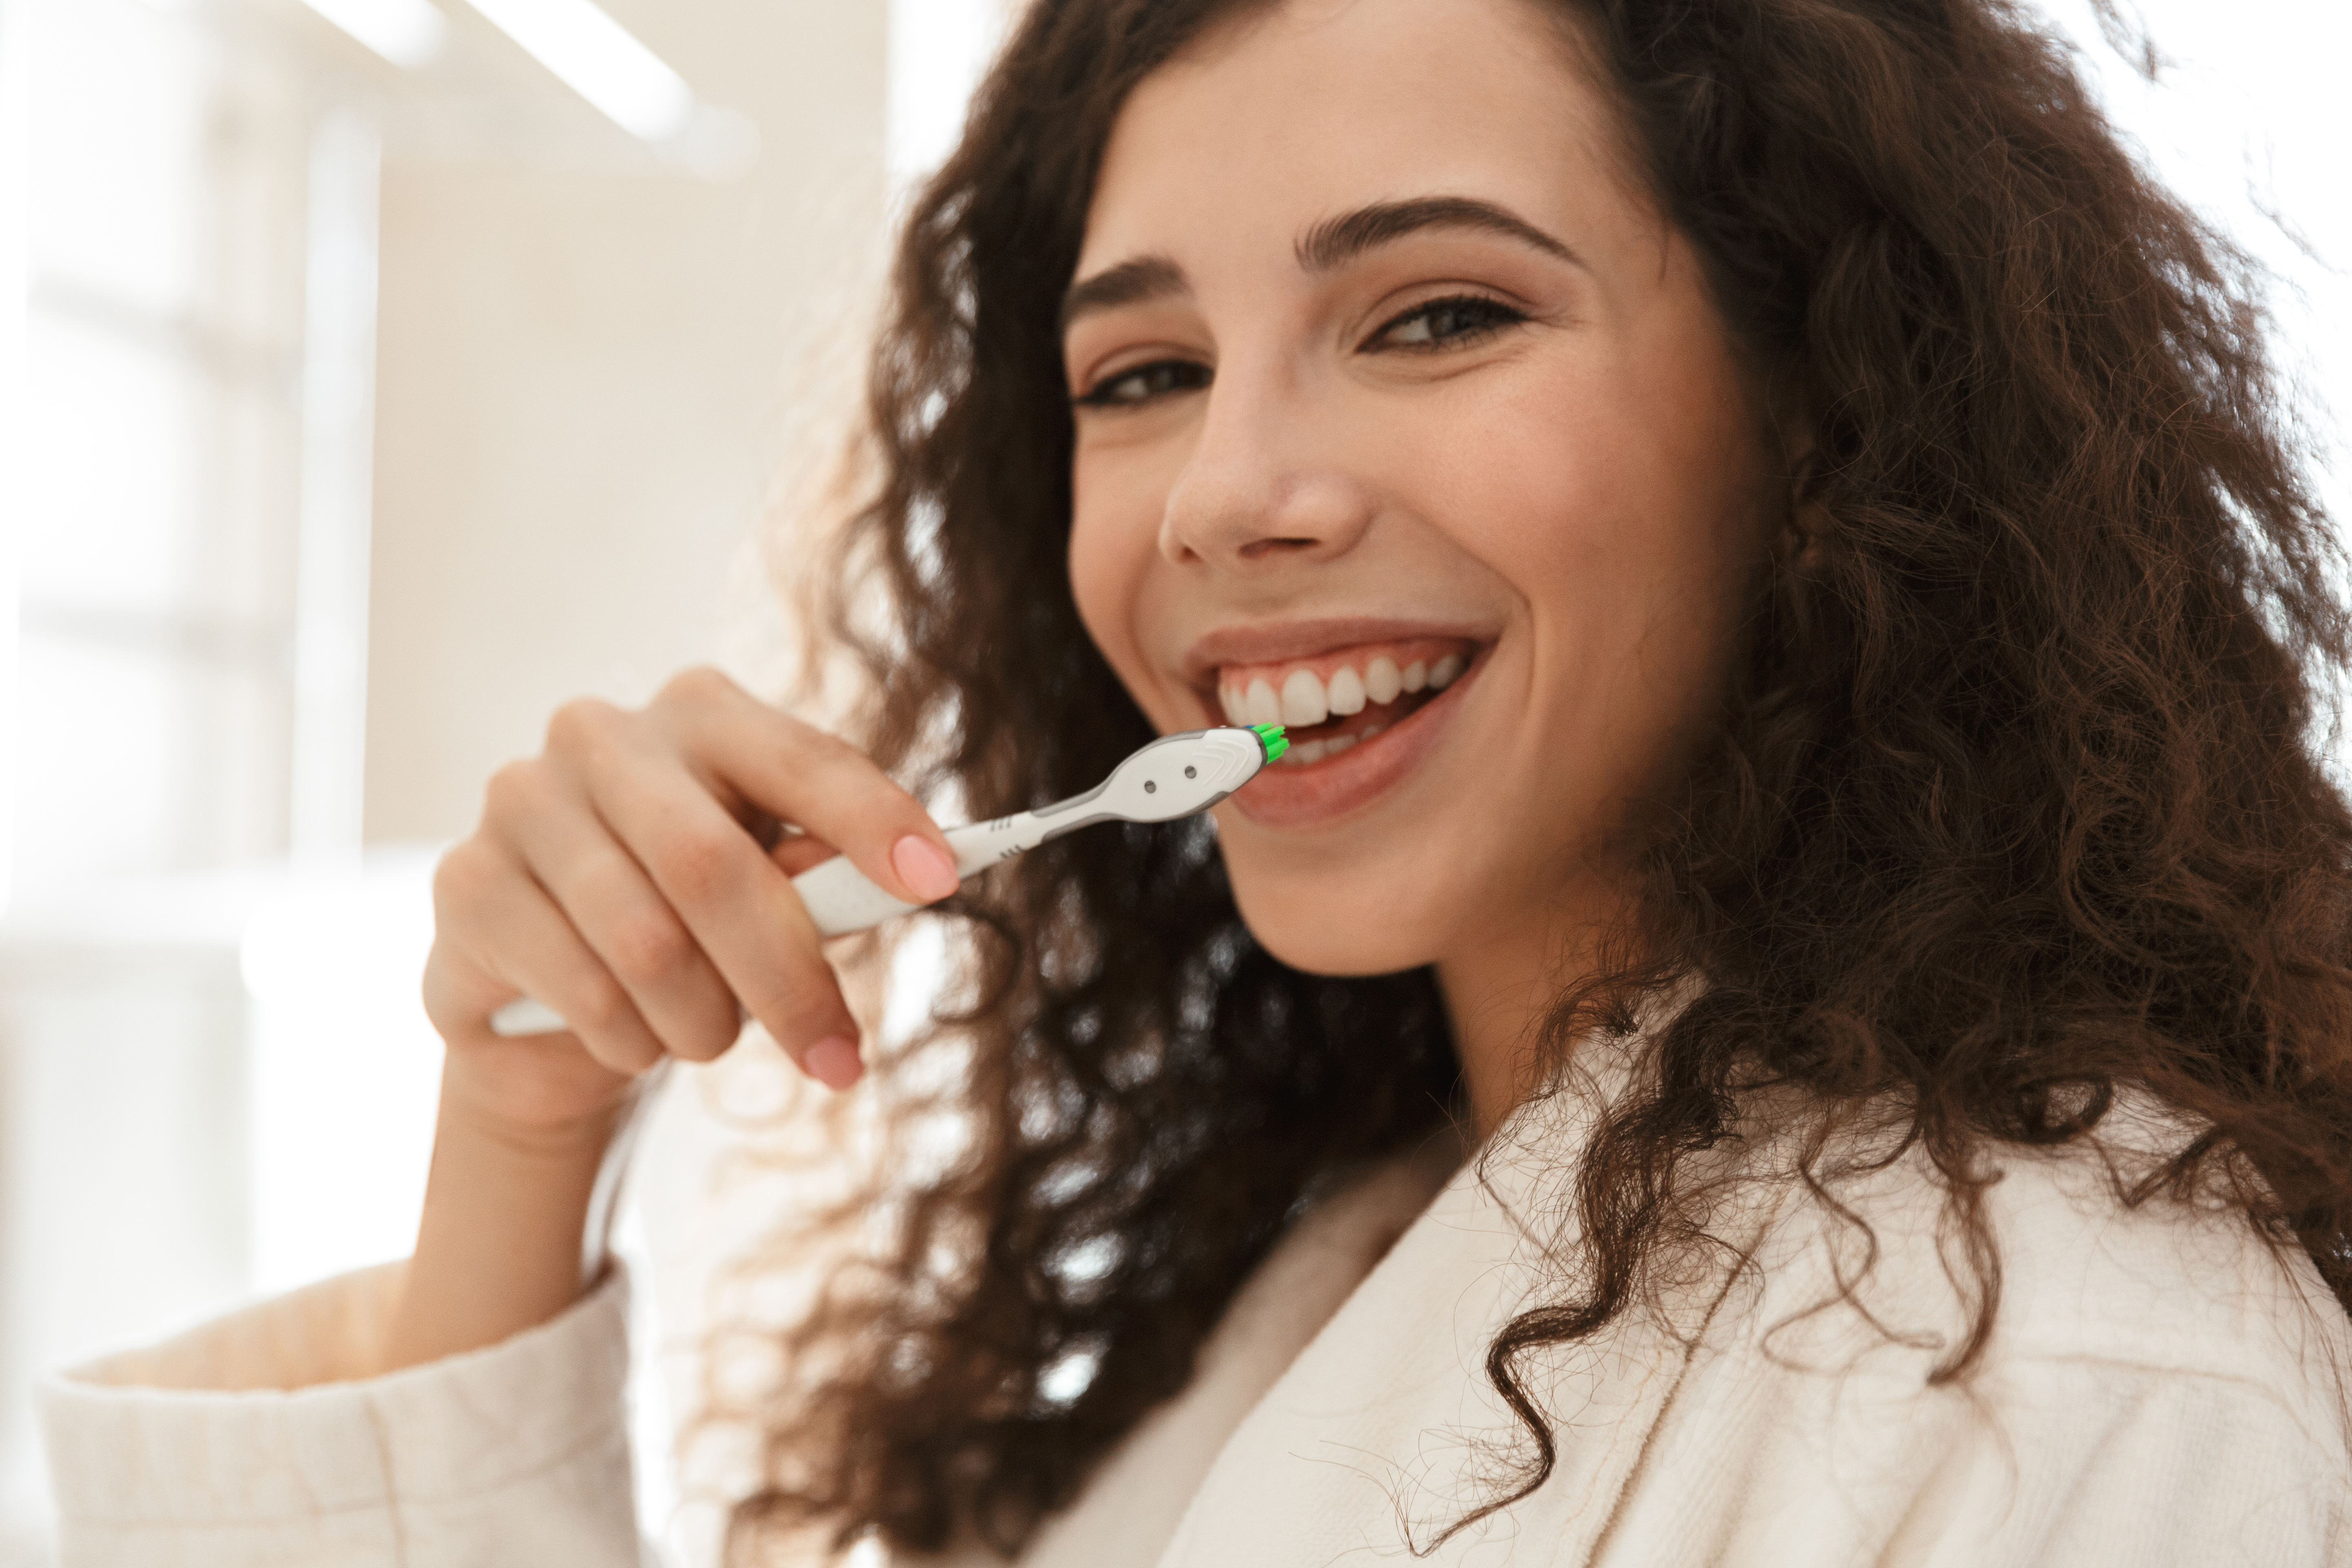 Three tips for good oral health